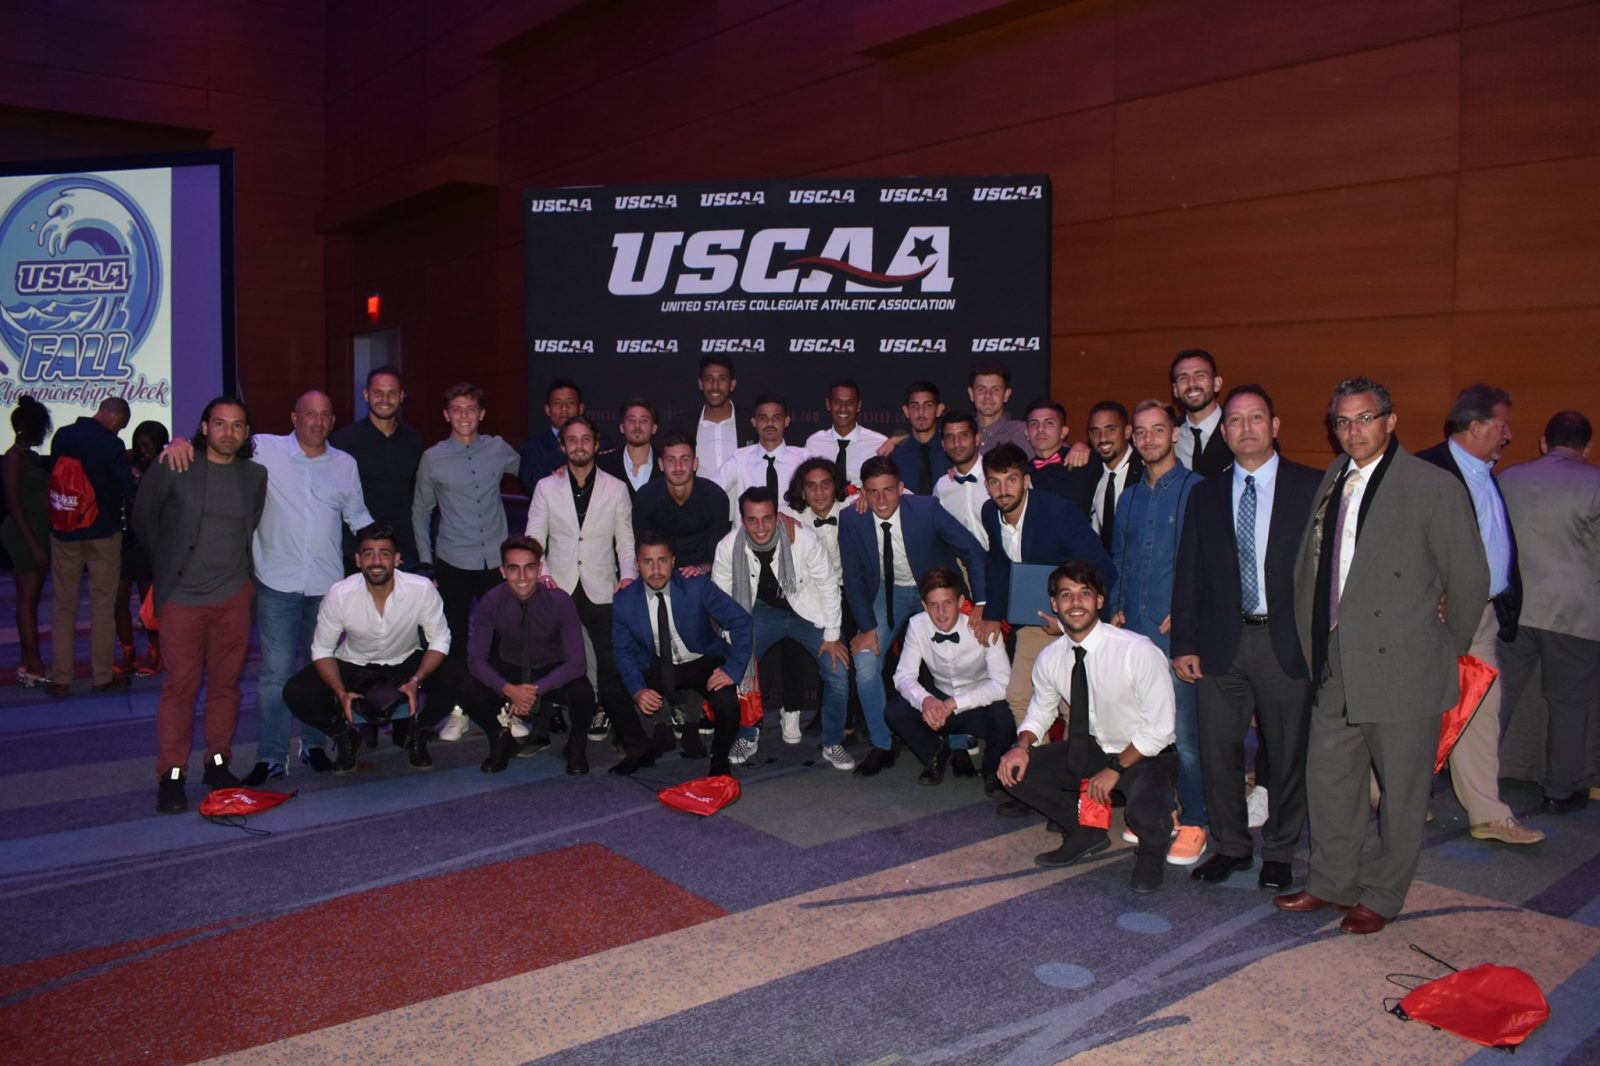 MEn's soccer at the USCAA Annual Banquet